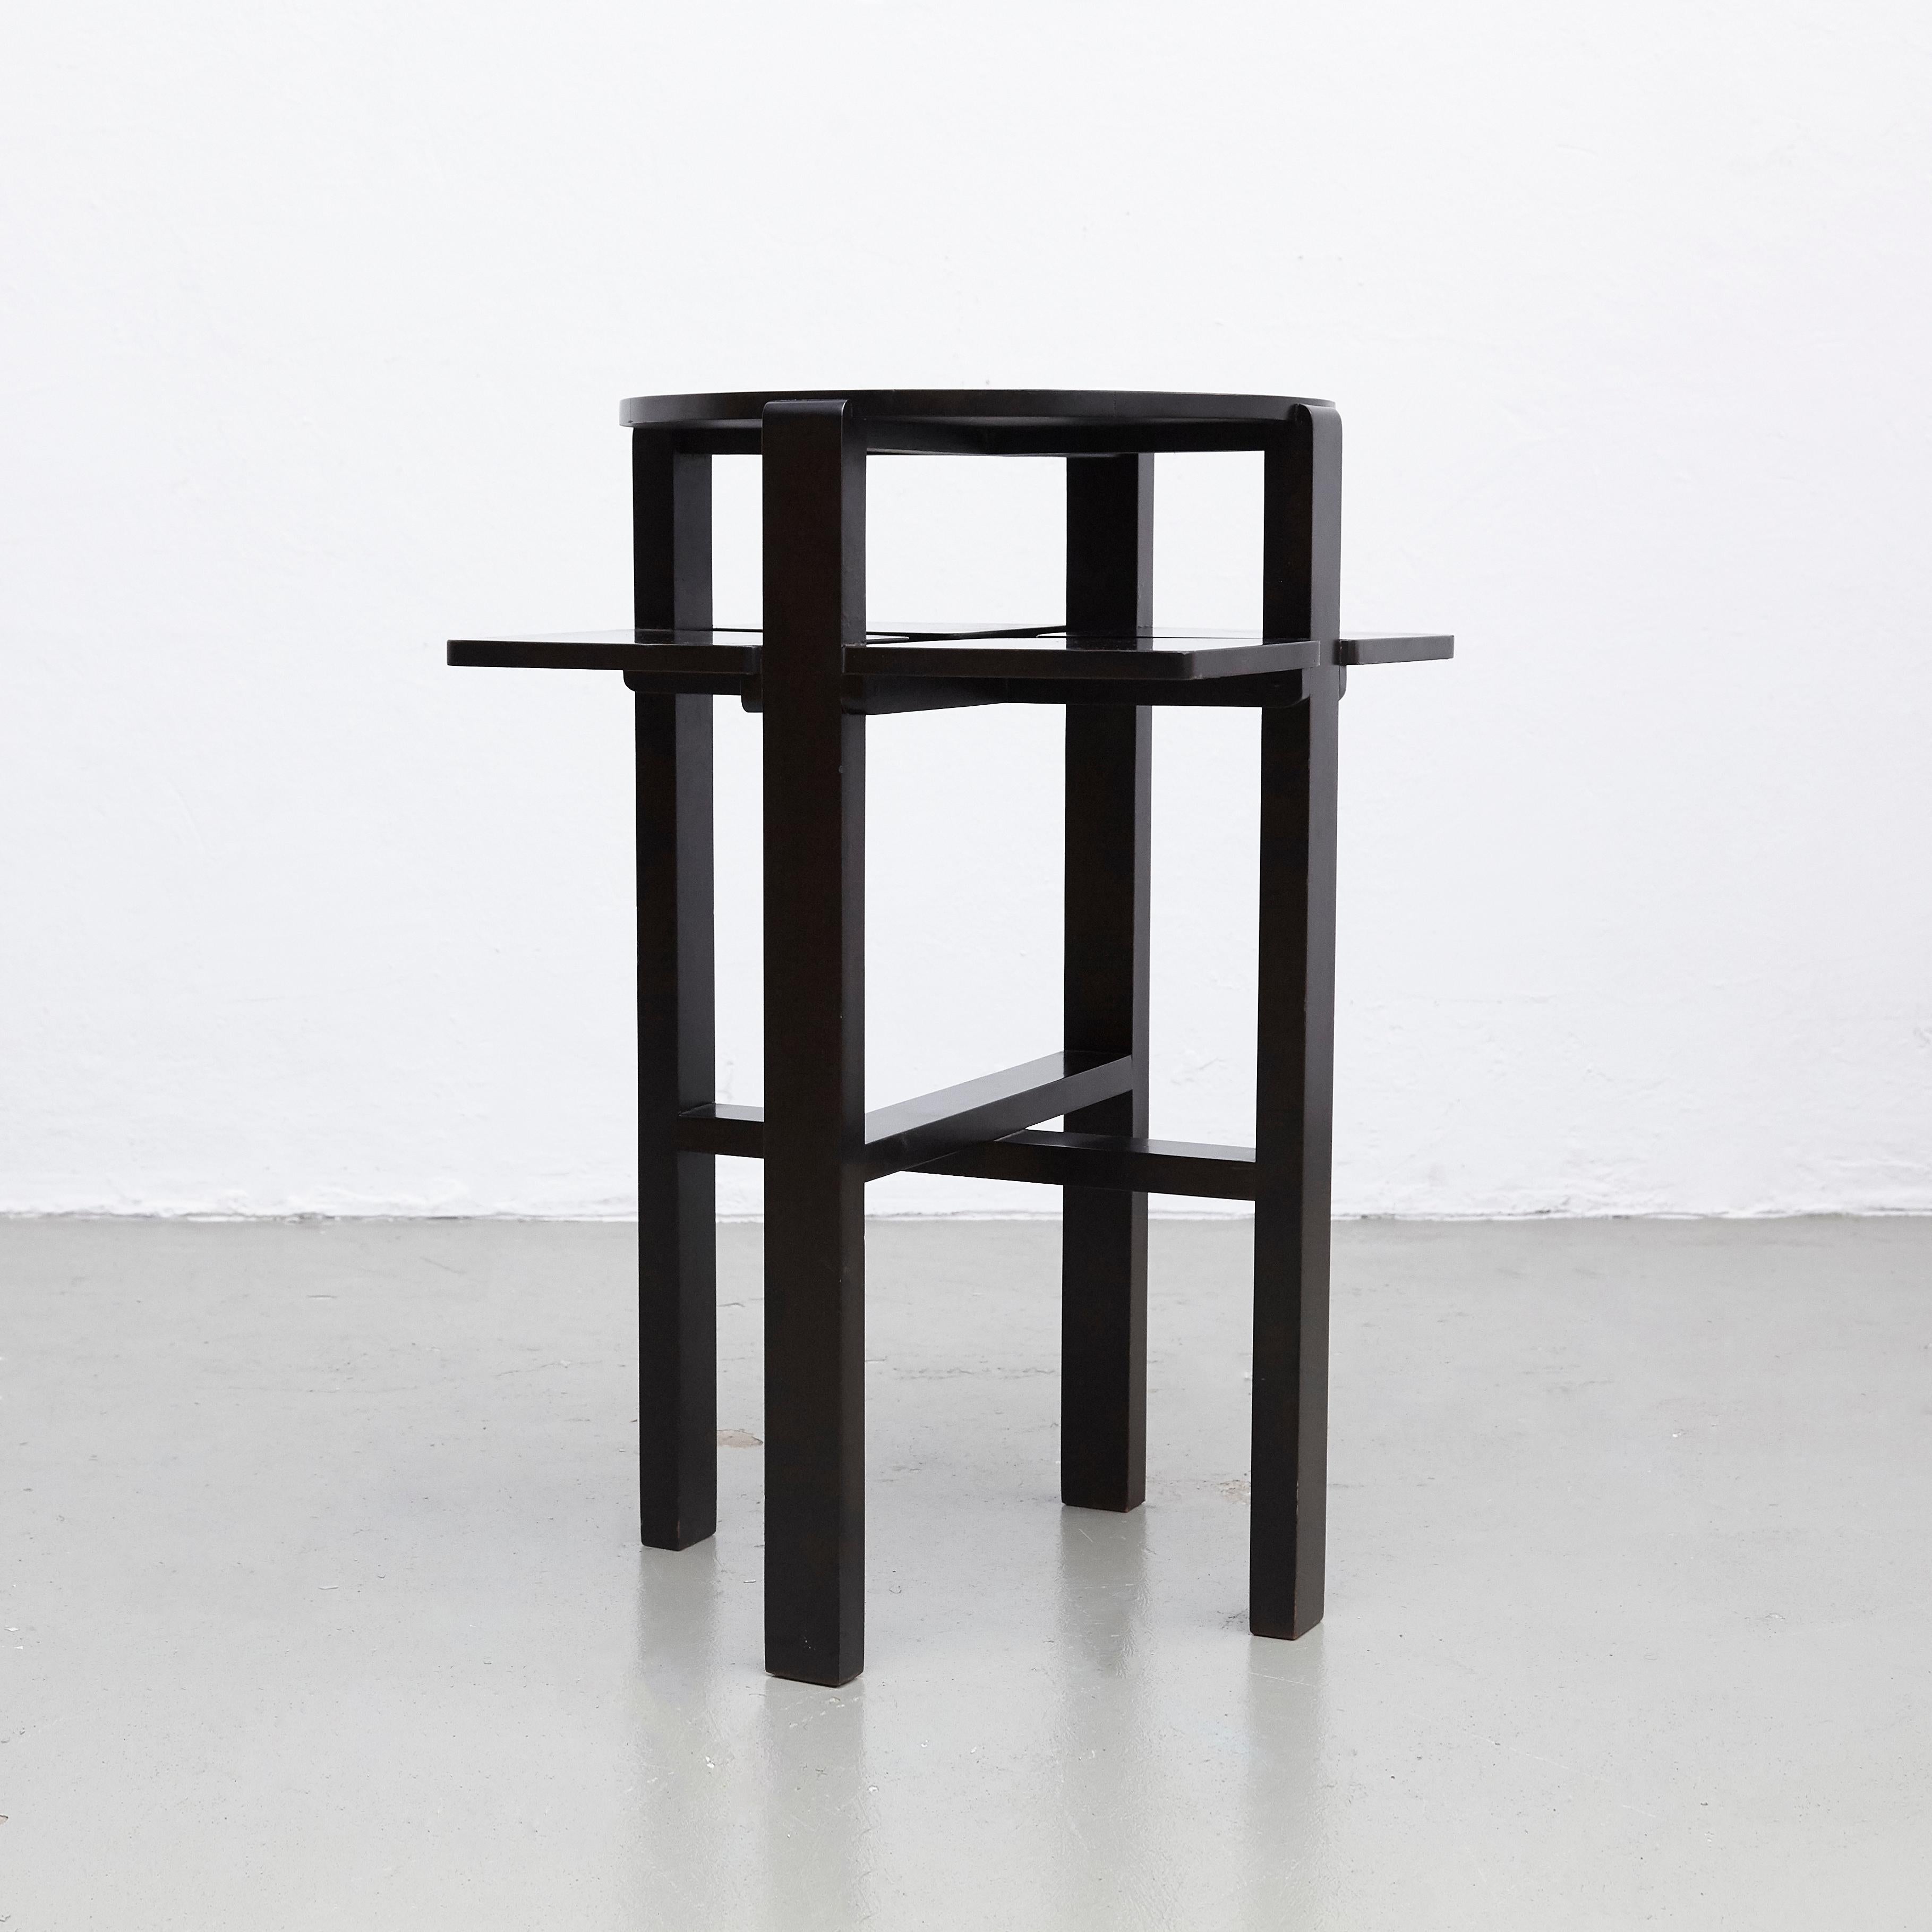 Side table designed by Charles Rennie Mackintosh in 1911.
Manufactured by BD, circa 1970.
Black lacquered solid beechwood

In good original condition, with minor wear consistent with age and use, preserving a beautiful patina.

Charles Rennie